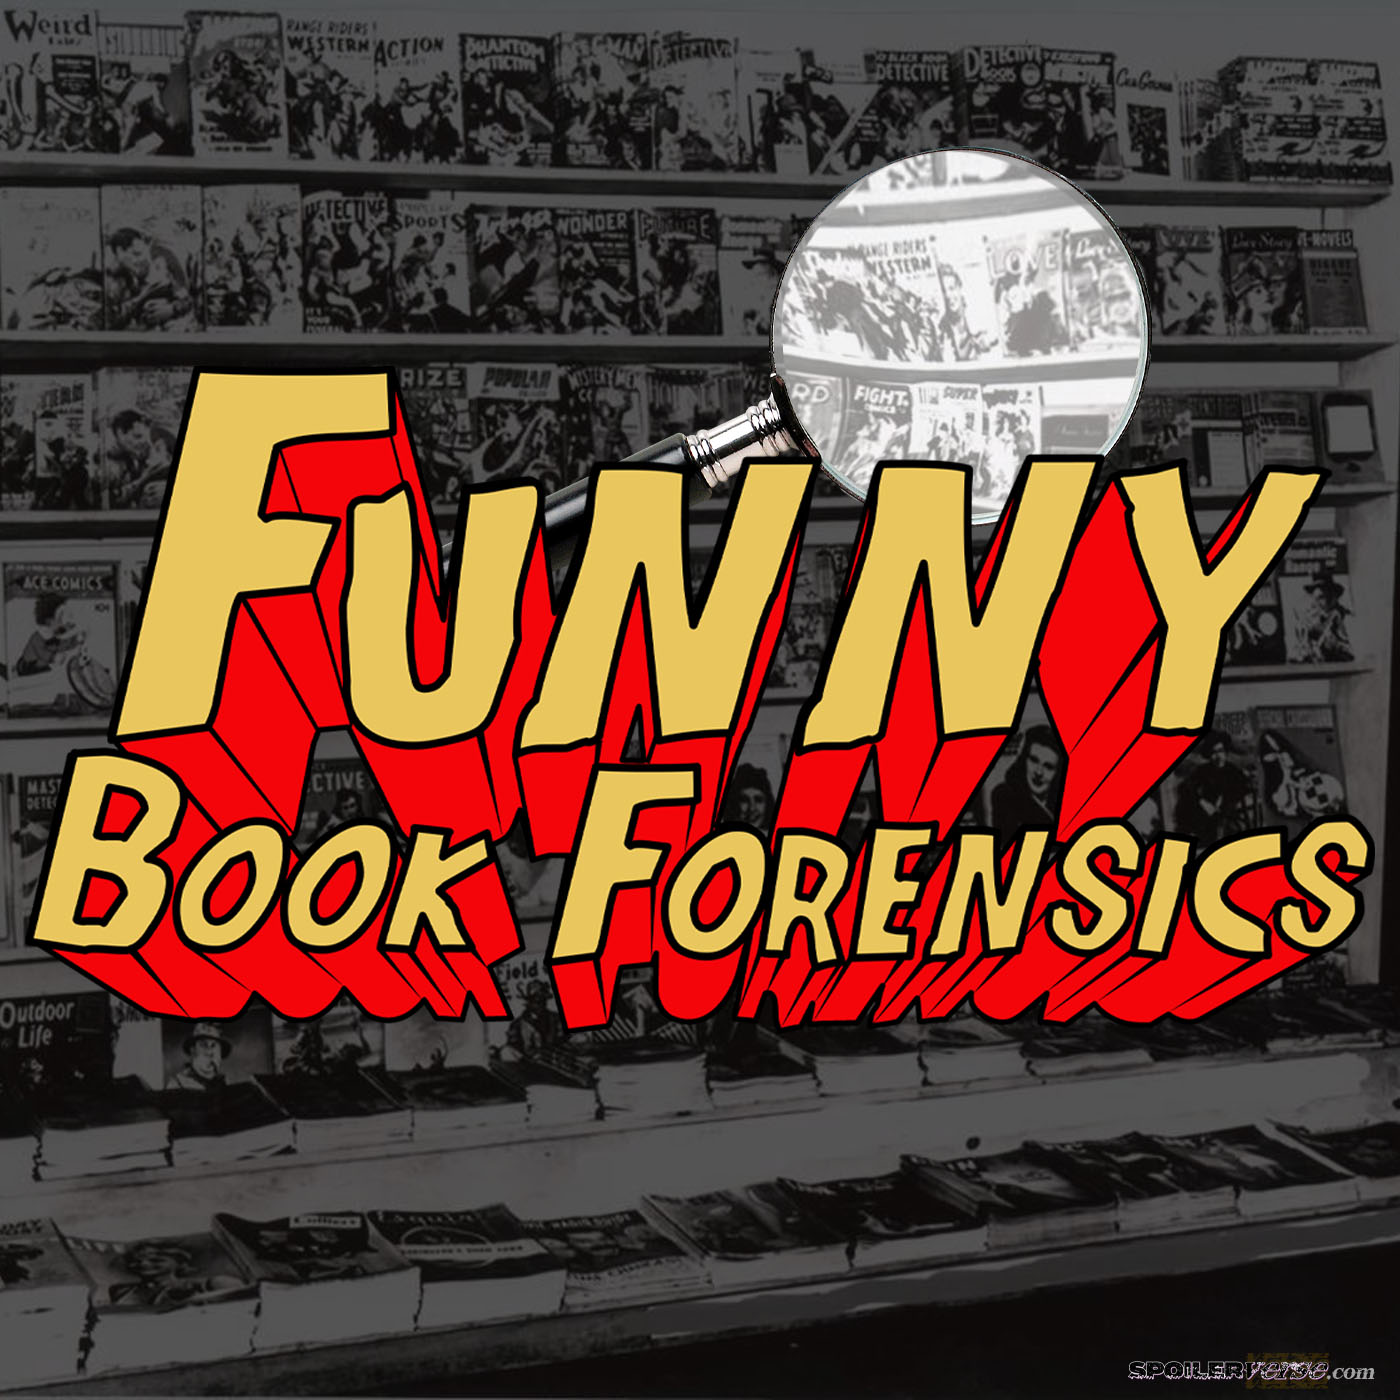 Funny Book Forensics 311 Tony Is Repulsing